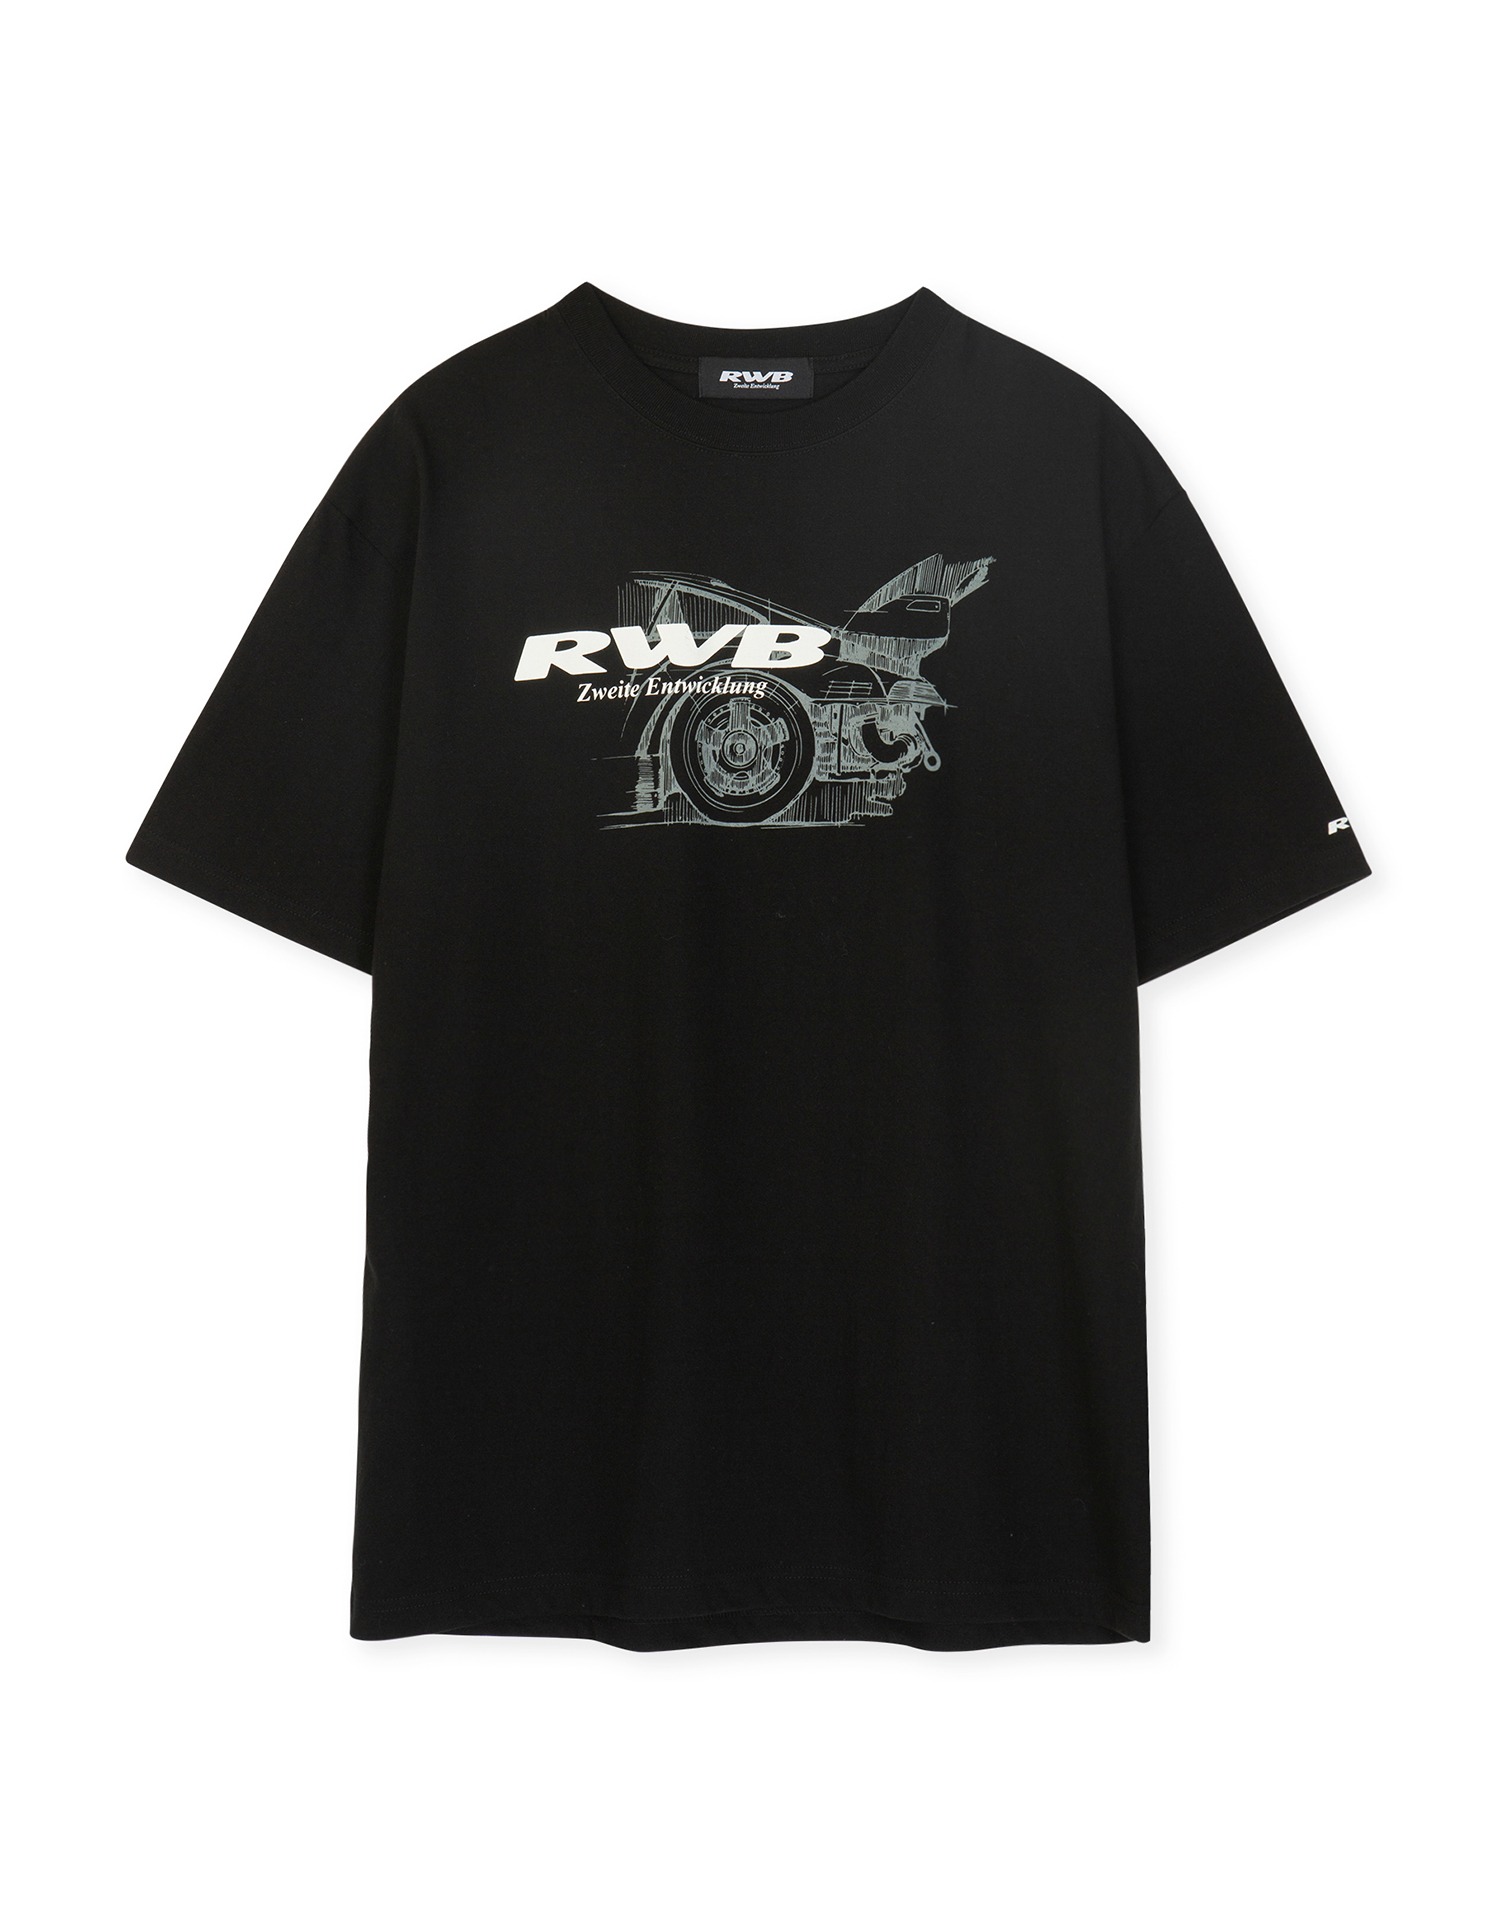 Rough Drawing S/S Tee - Black